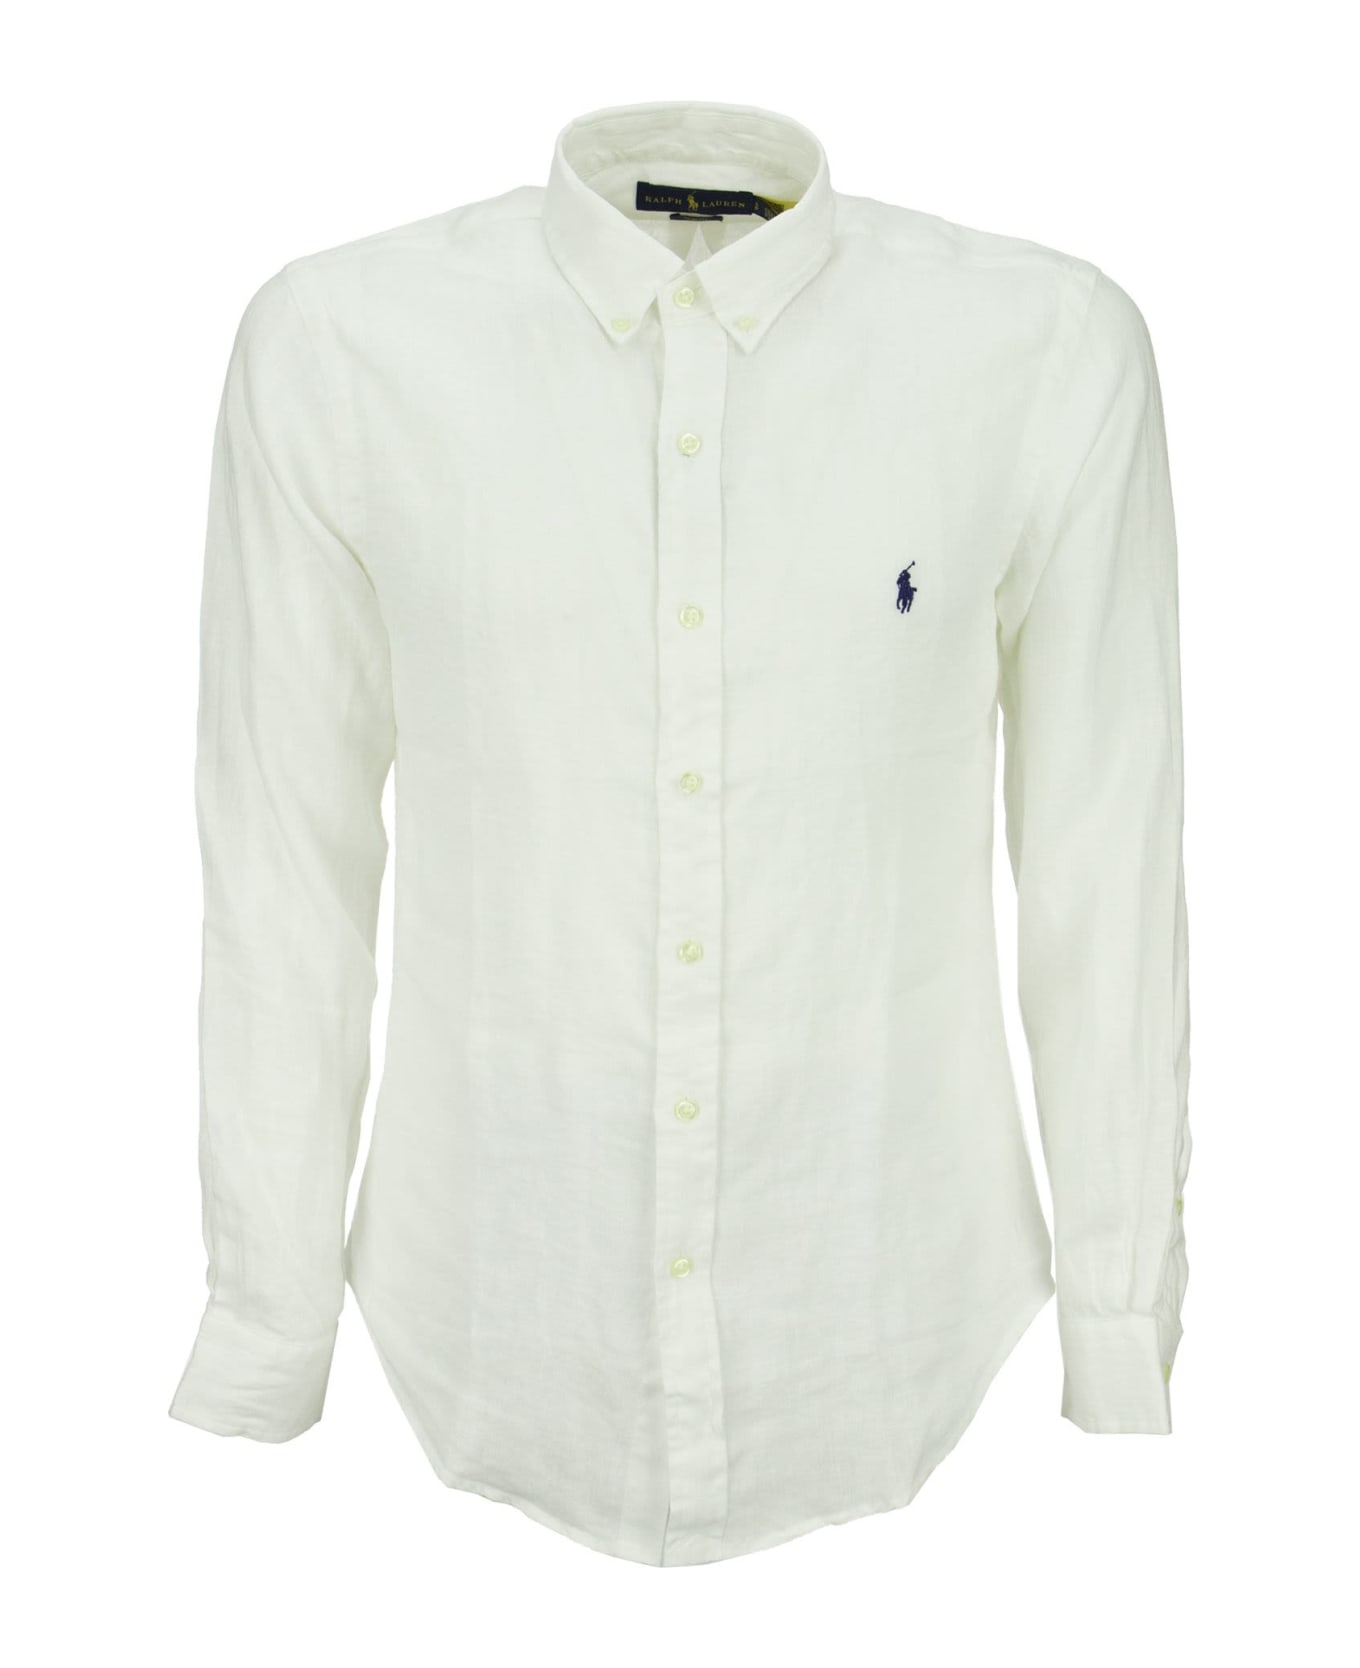 Polo Ralph Lauren White Slim Fit Linen Shirt With Blue Pony - Bianco シャツ